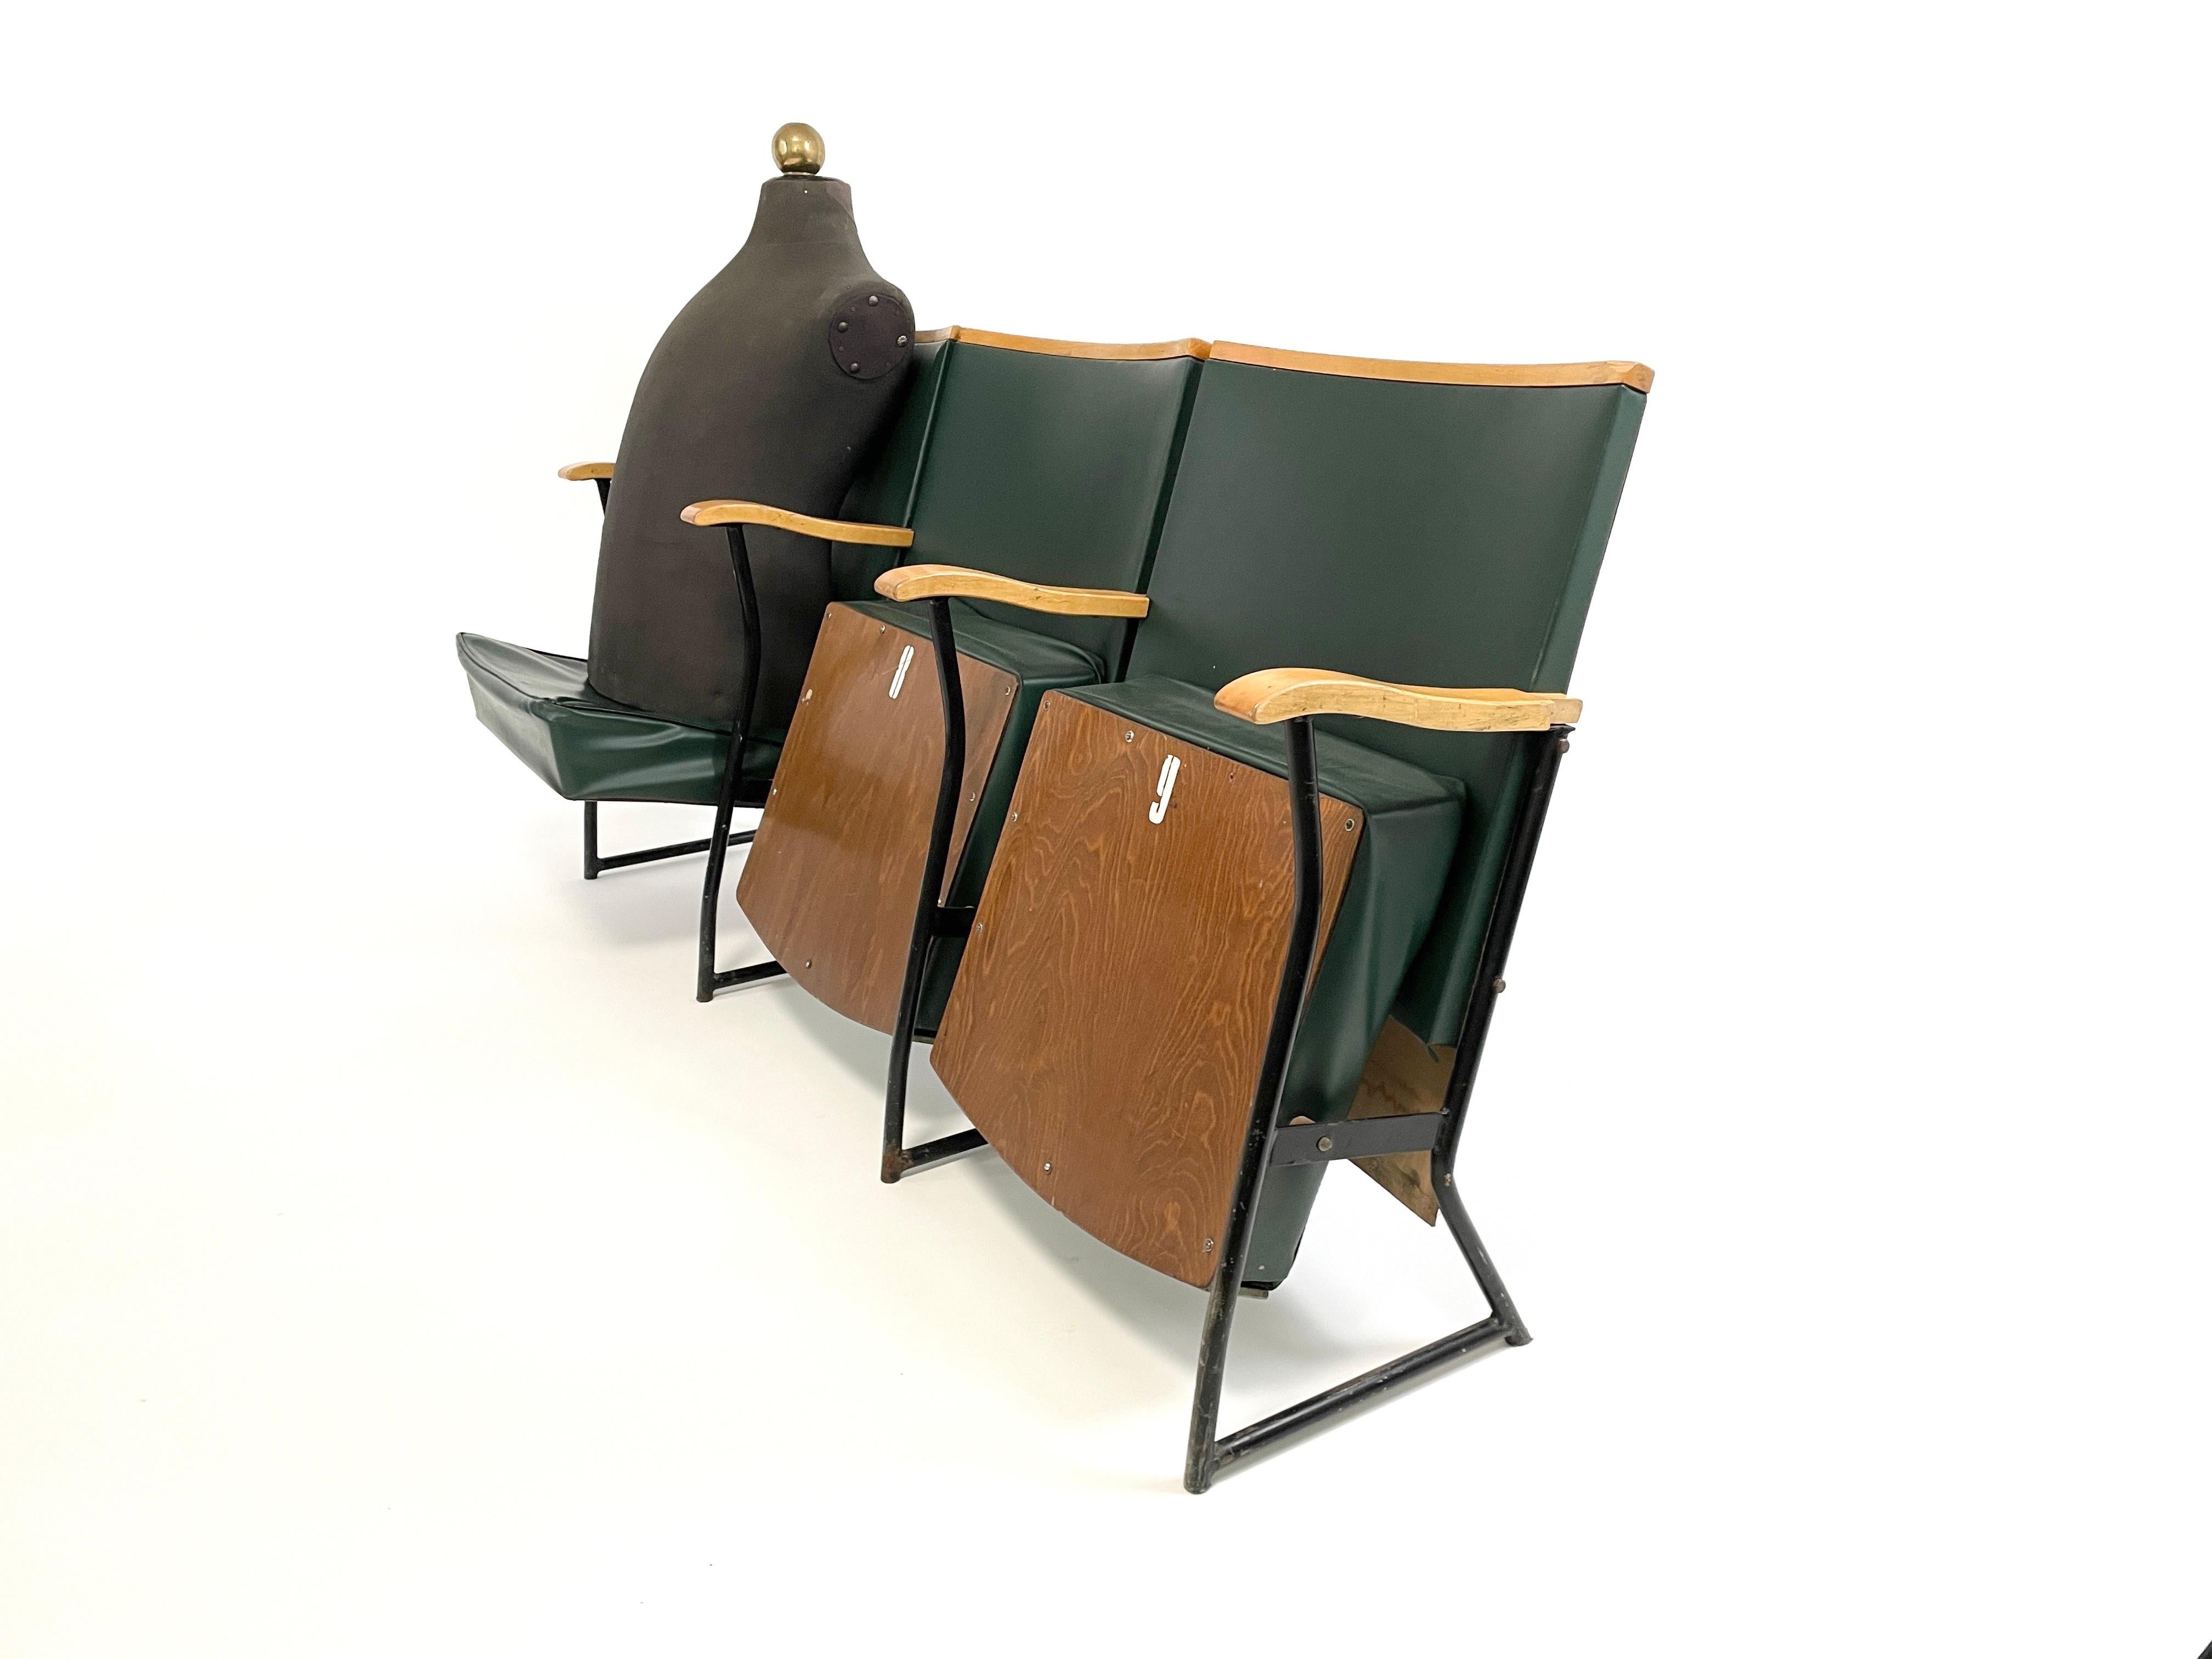 Transform your space with the soul of Helsinki's cultural history embodied in an original 3-seat bench from The House of Culture Helsinki, designed by Alvar Aalto between 1952-1958. Whether in your living room, lobby or entryway, it shares tales of